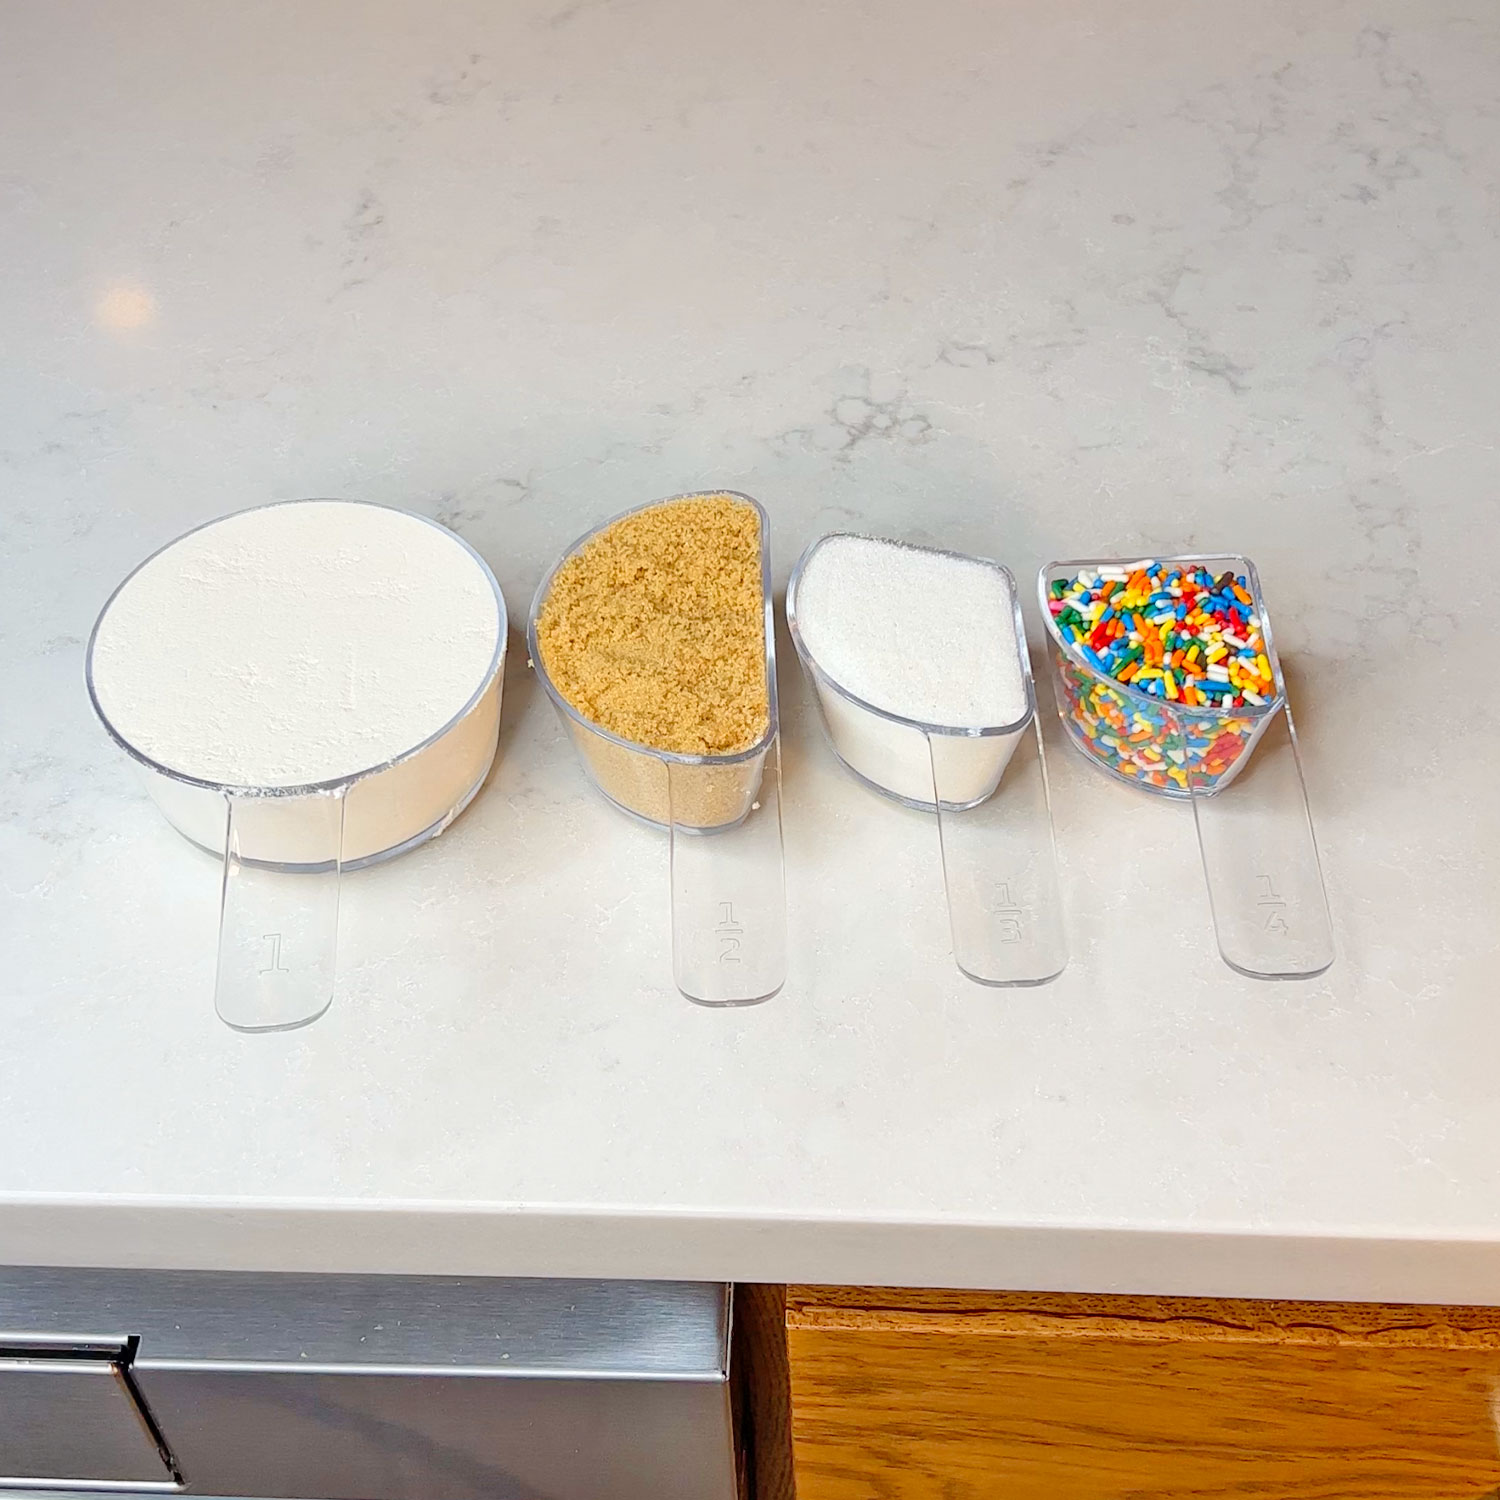 Genius Amazon Finds: Visual Measuring Cups, Dishwasher Wine Glass Holder, Clean/Dirty Magnet